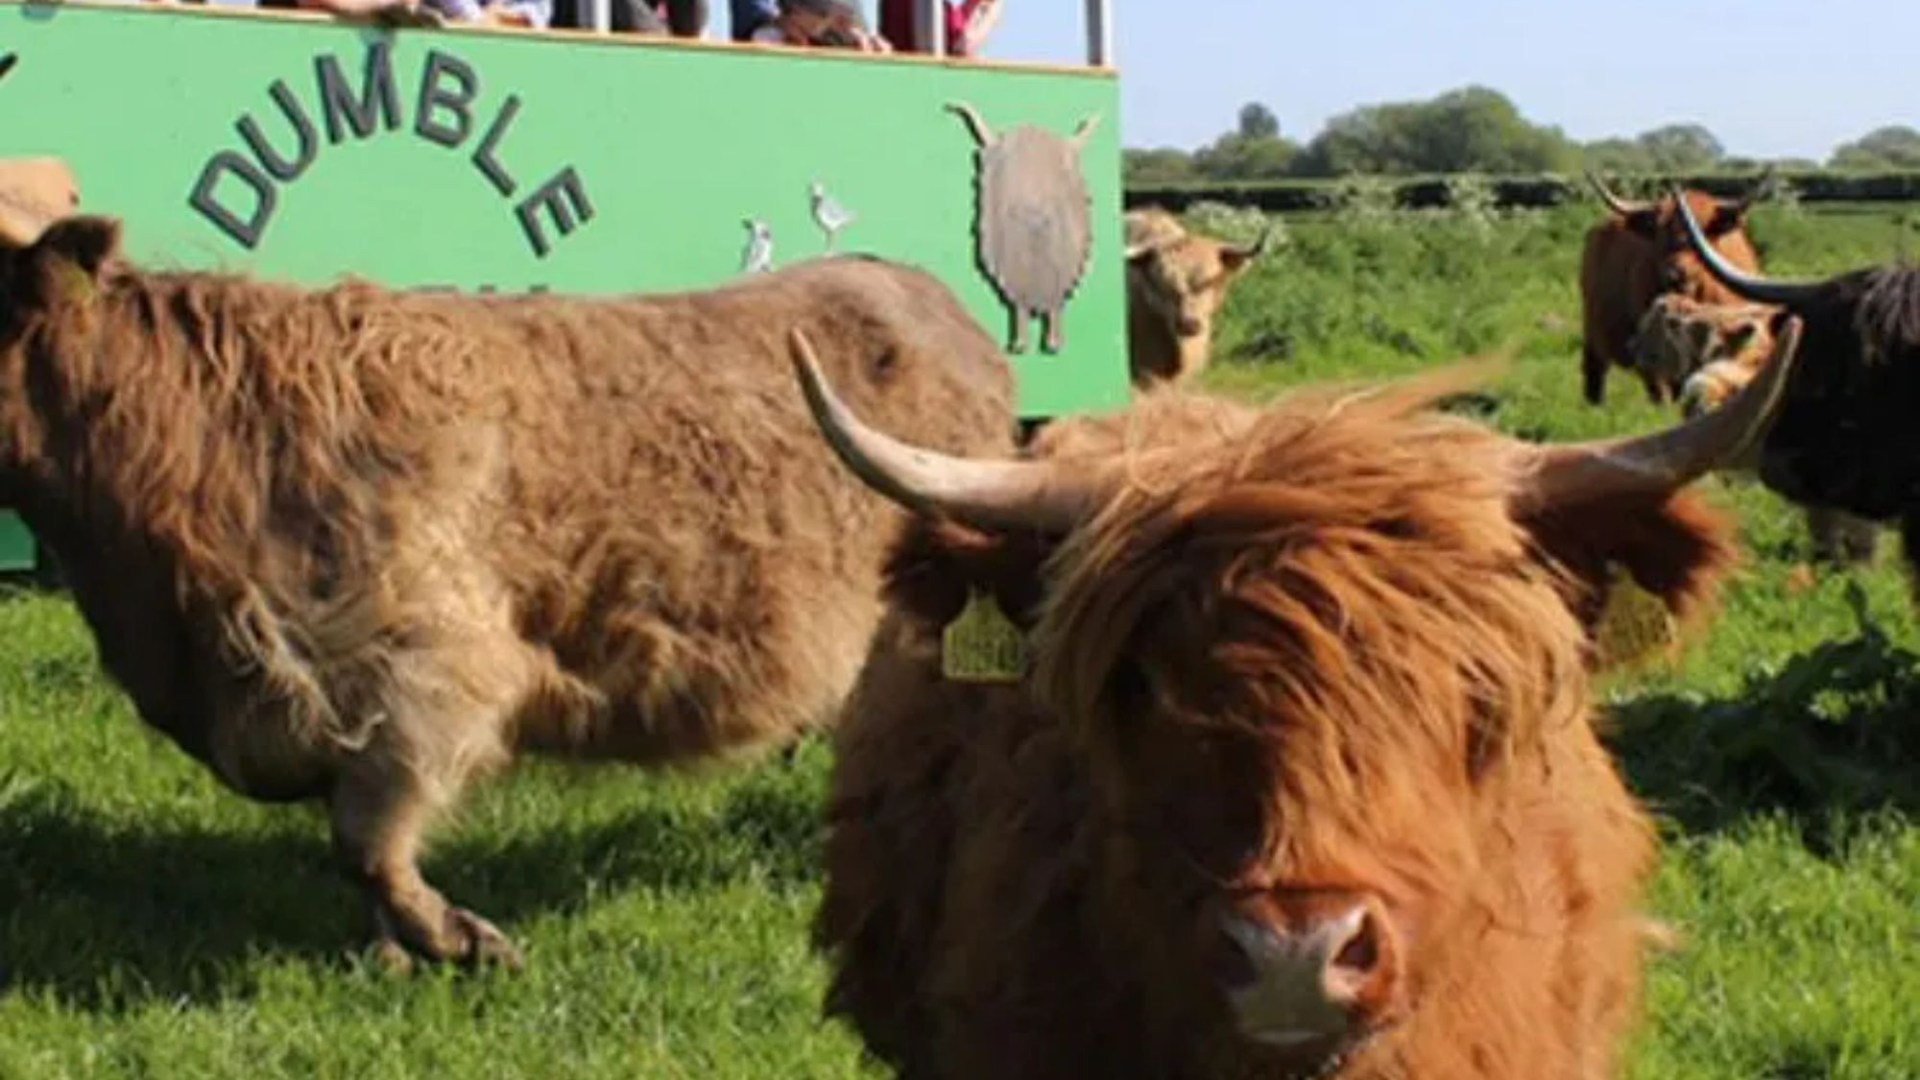 Unbelievable Boozy Picnic with Highland Cows: A Bizarre English Experience